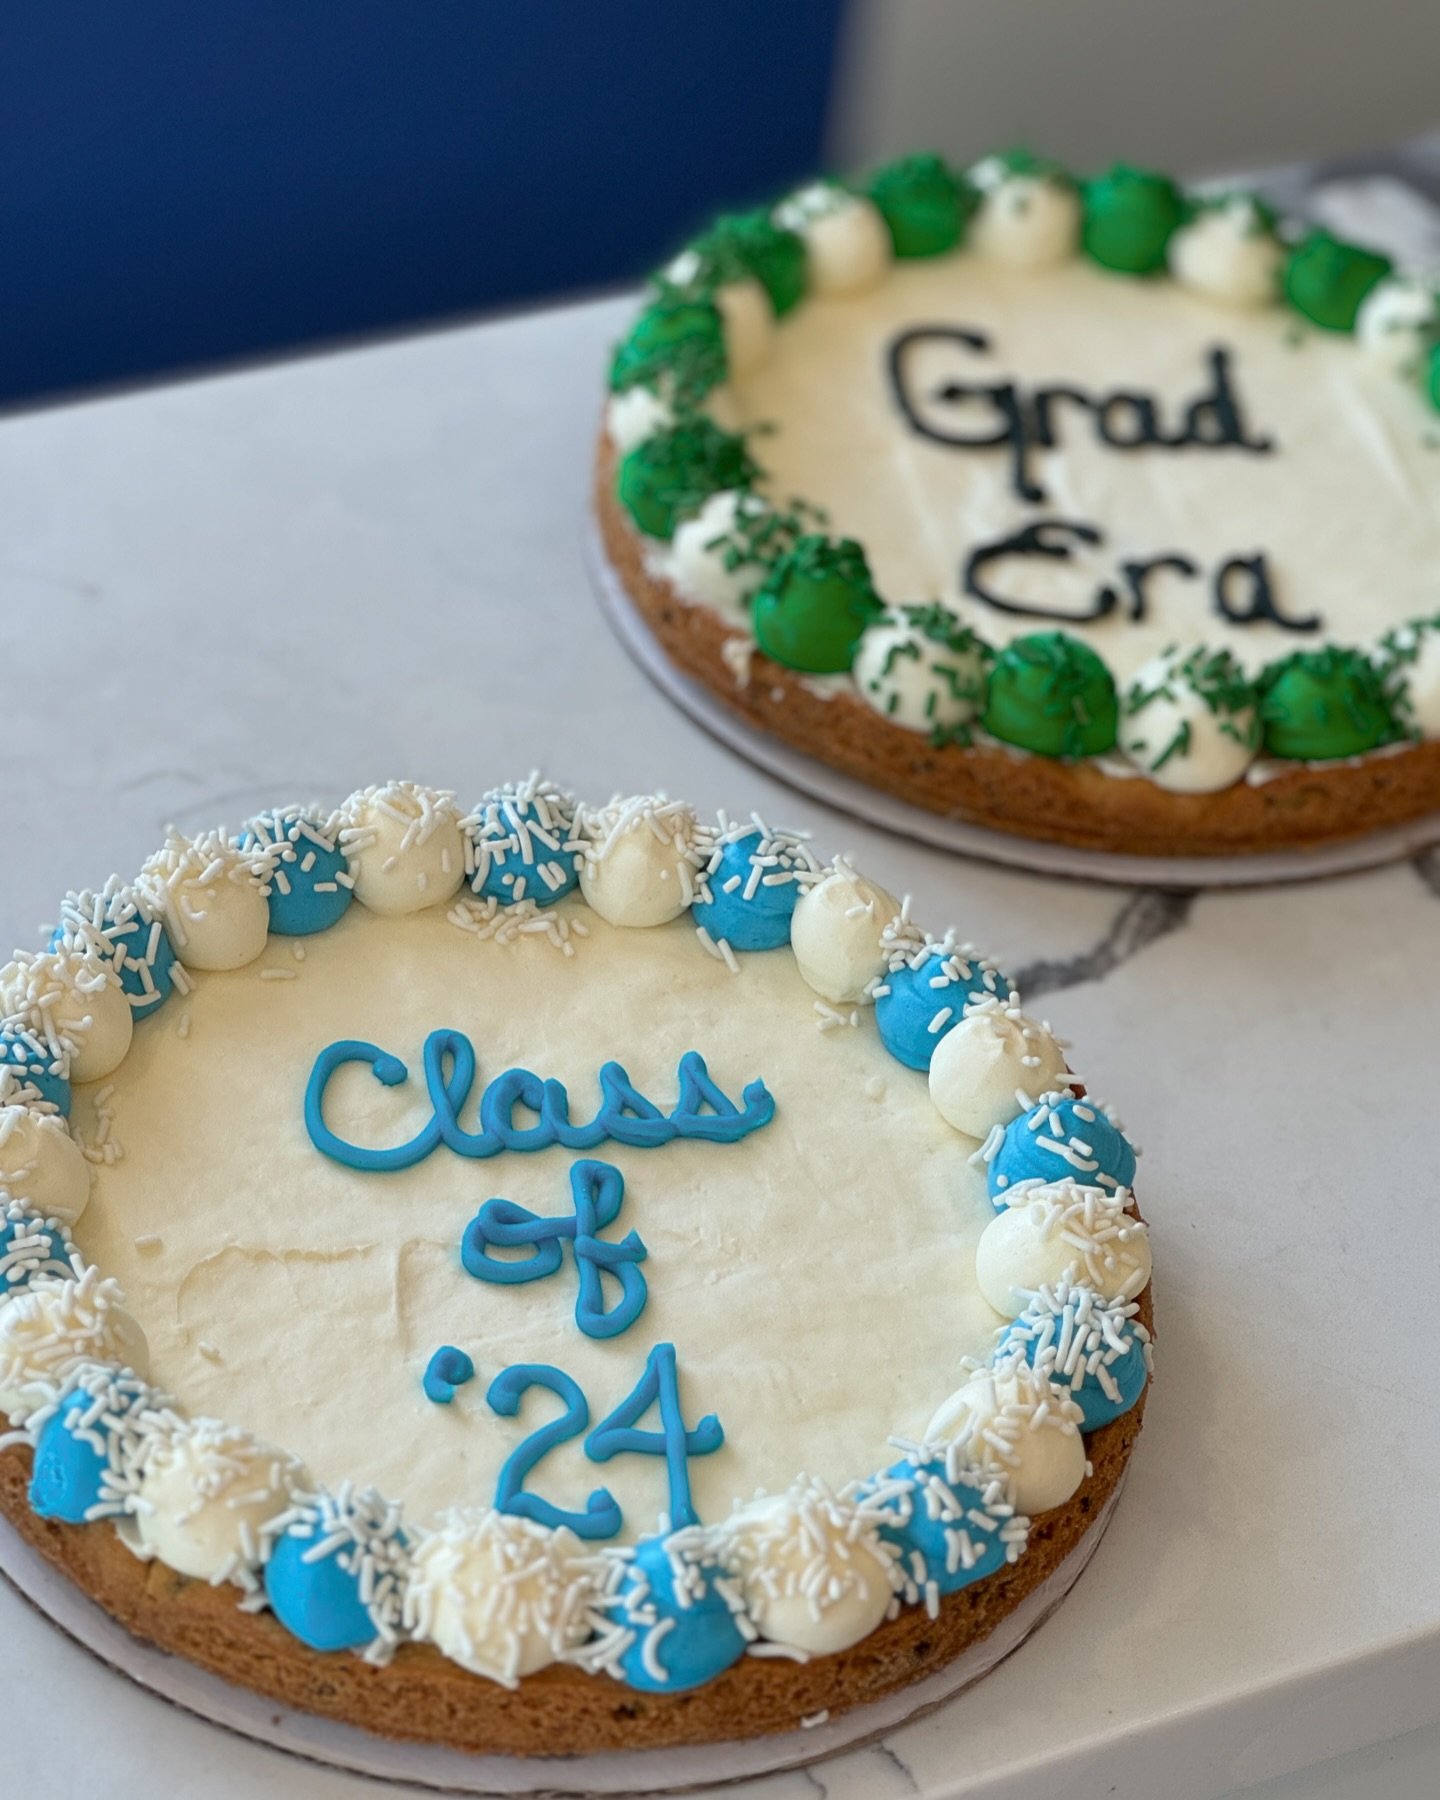 Ok Grads it&rsquo;s your time to shine✨
Order a celebration cake online - any flavor, any color decoration &amp; any quote you&rsquo;d like for $25! 

Celebration cakes are a 9in cookie cake topped with a thin cheesecake layer, with cheesecake dollop